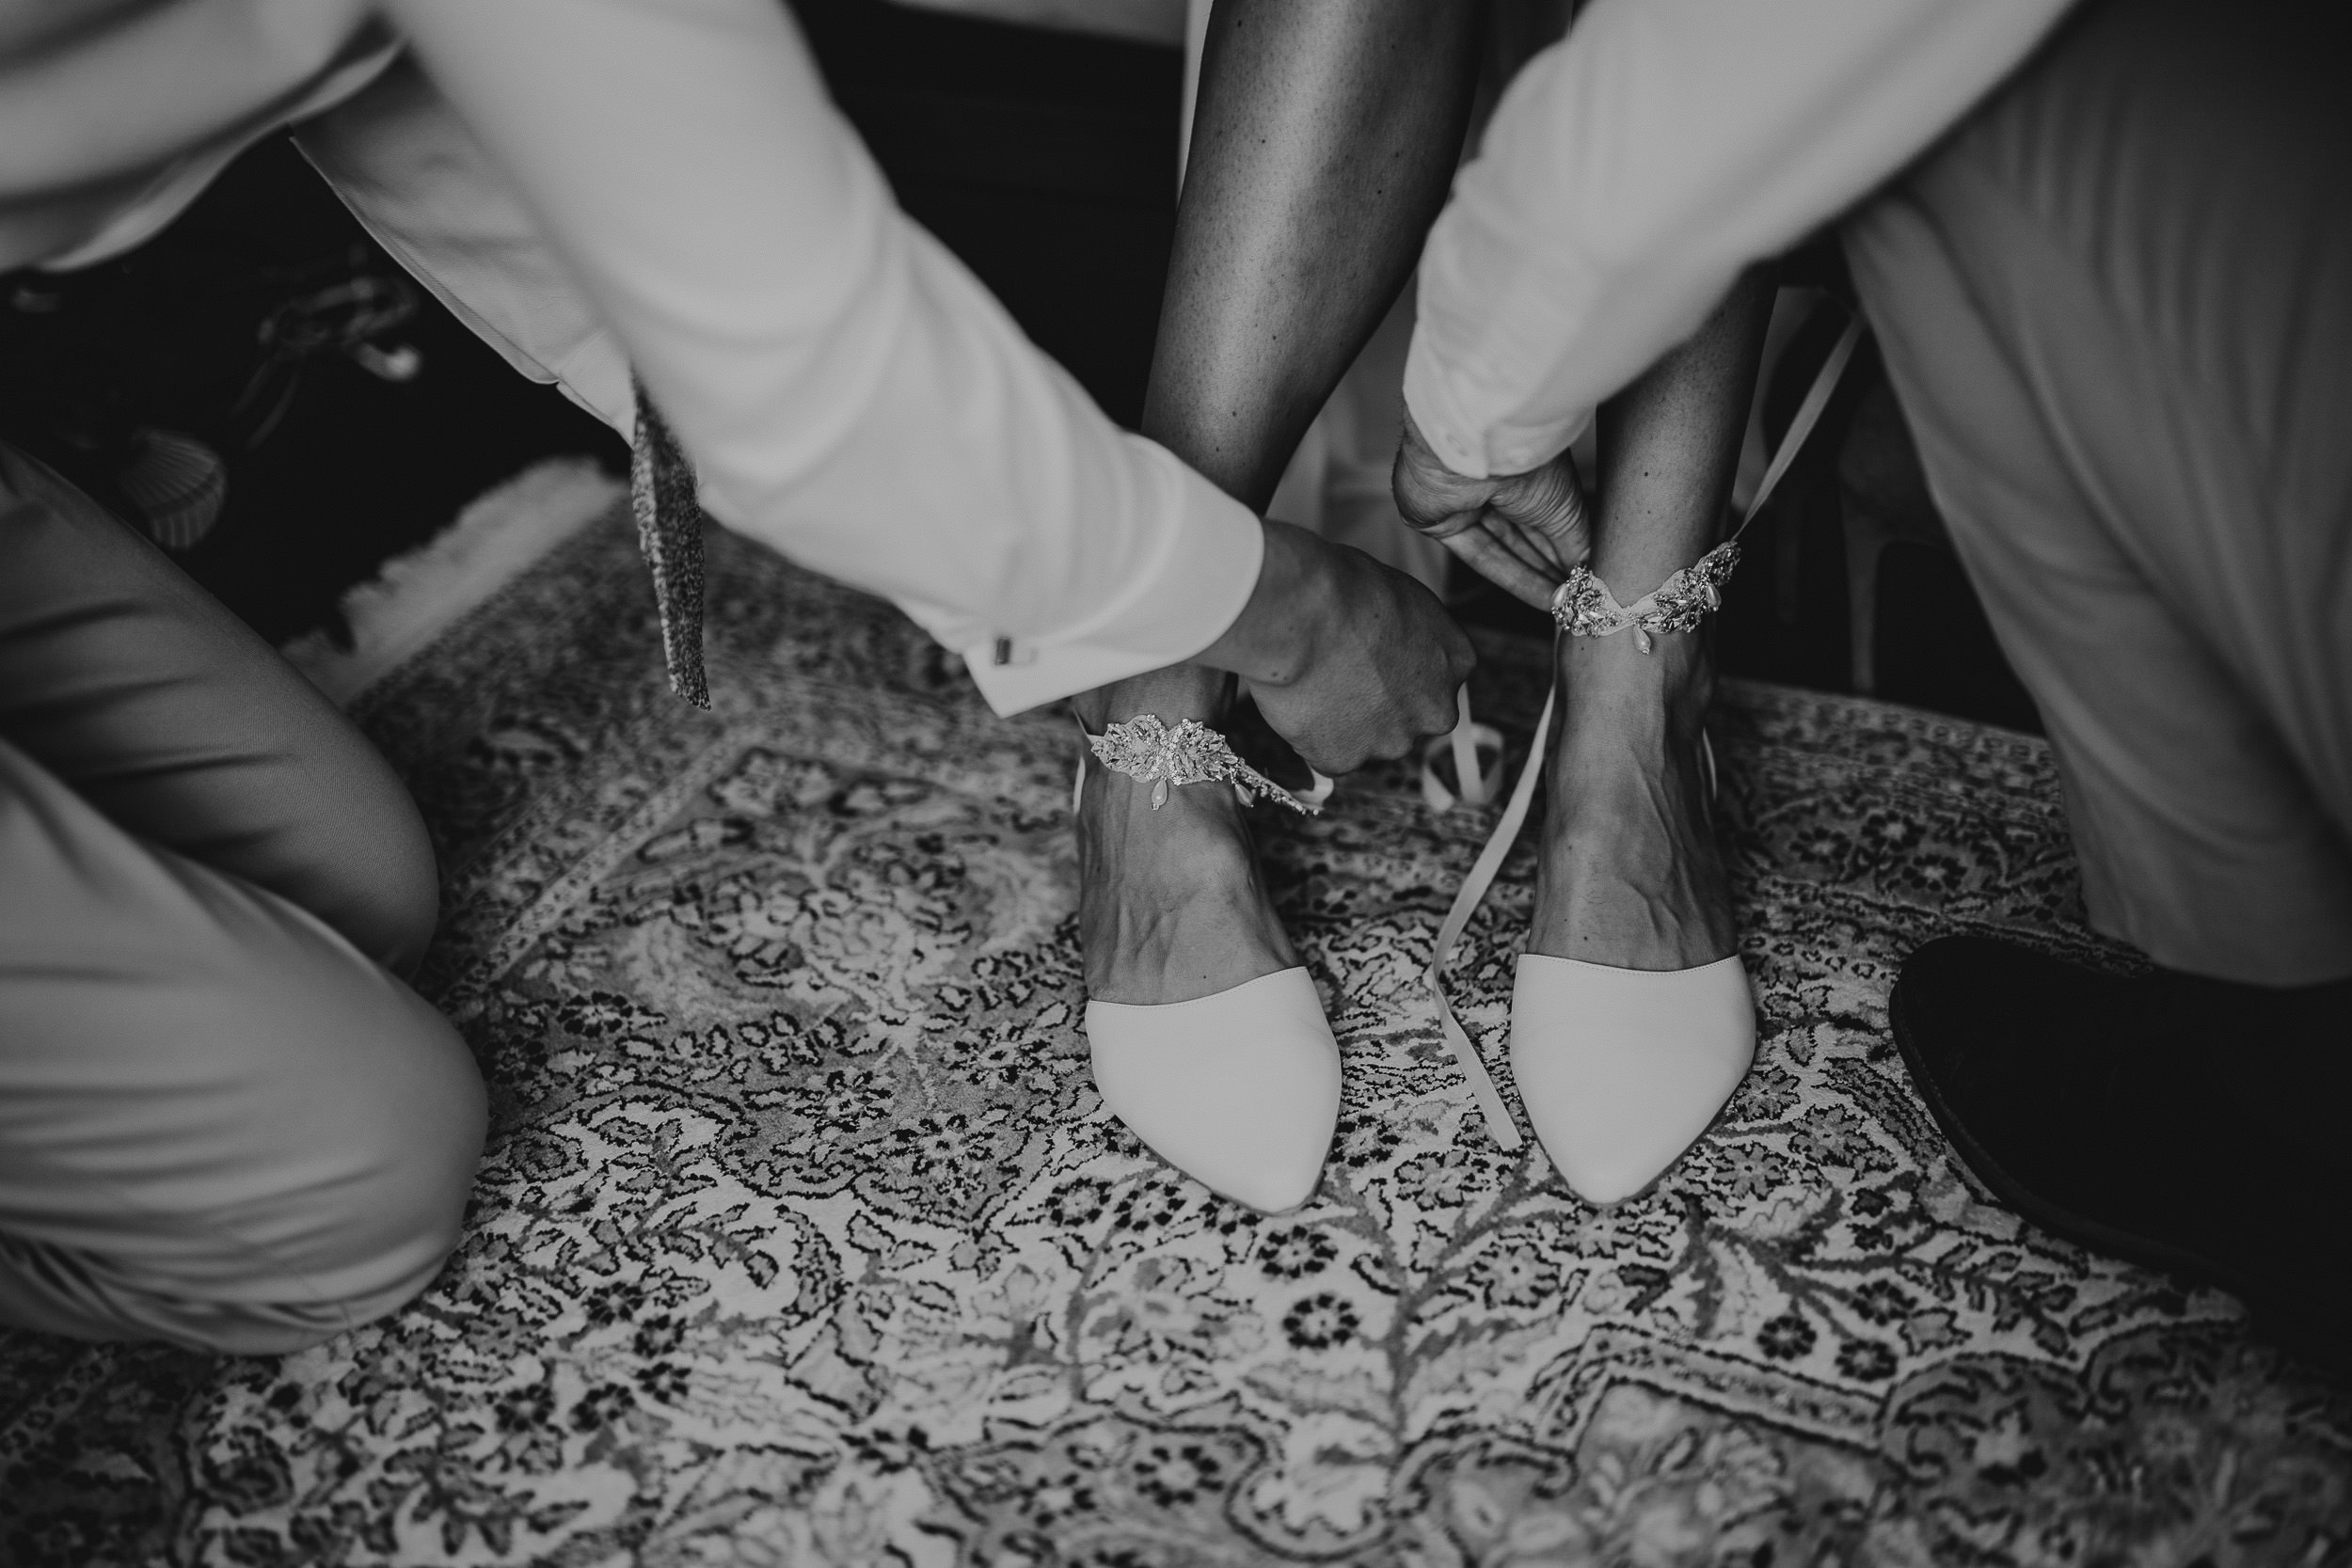 A wedding couple tying their shoes on a rug.